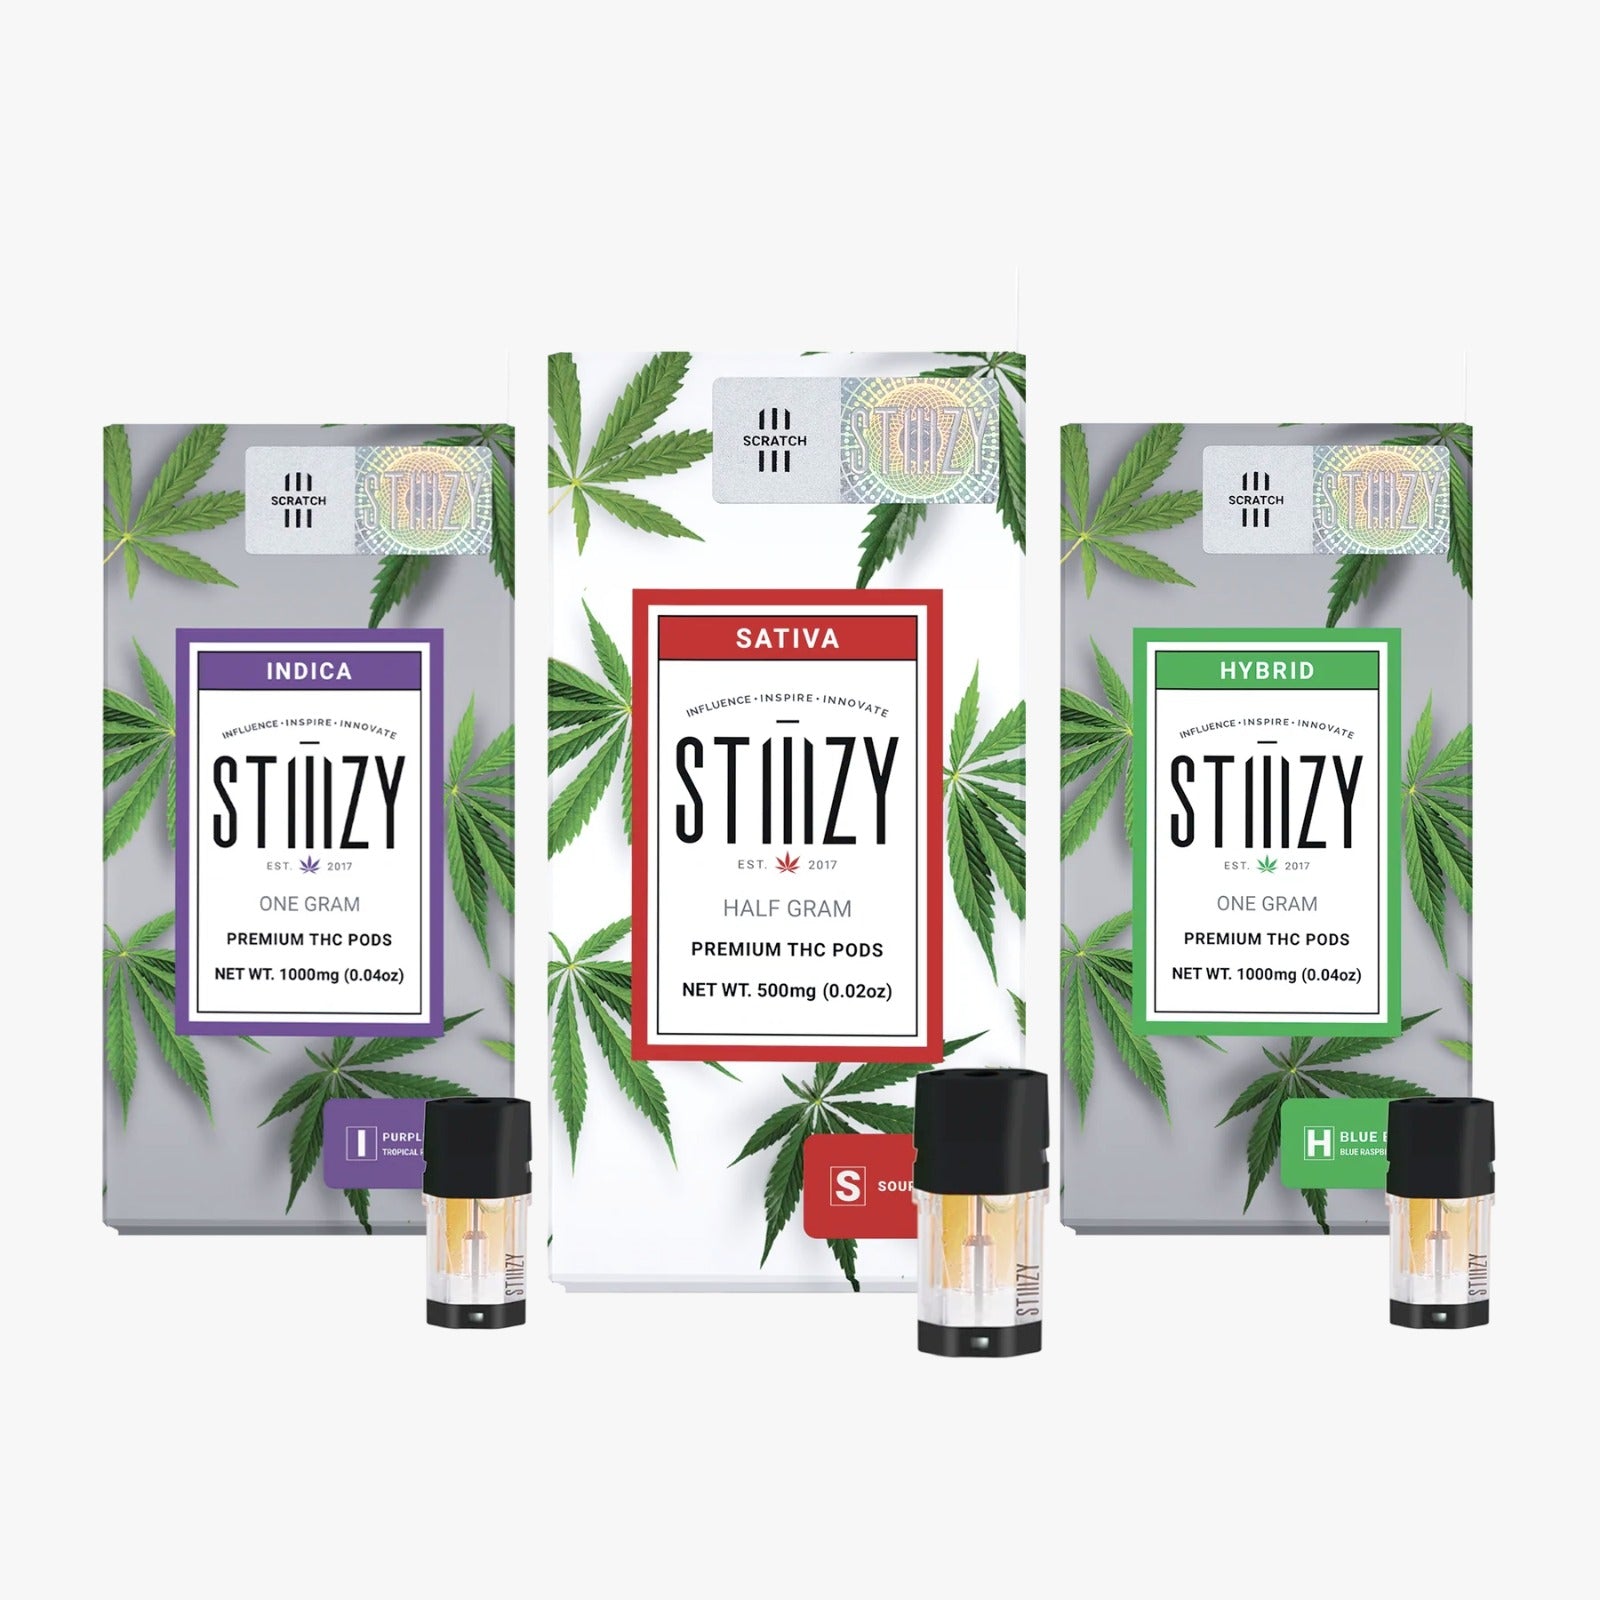 Three original THC weed vape pods with botanical terpenes stand in front of their STIIIZY packages.